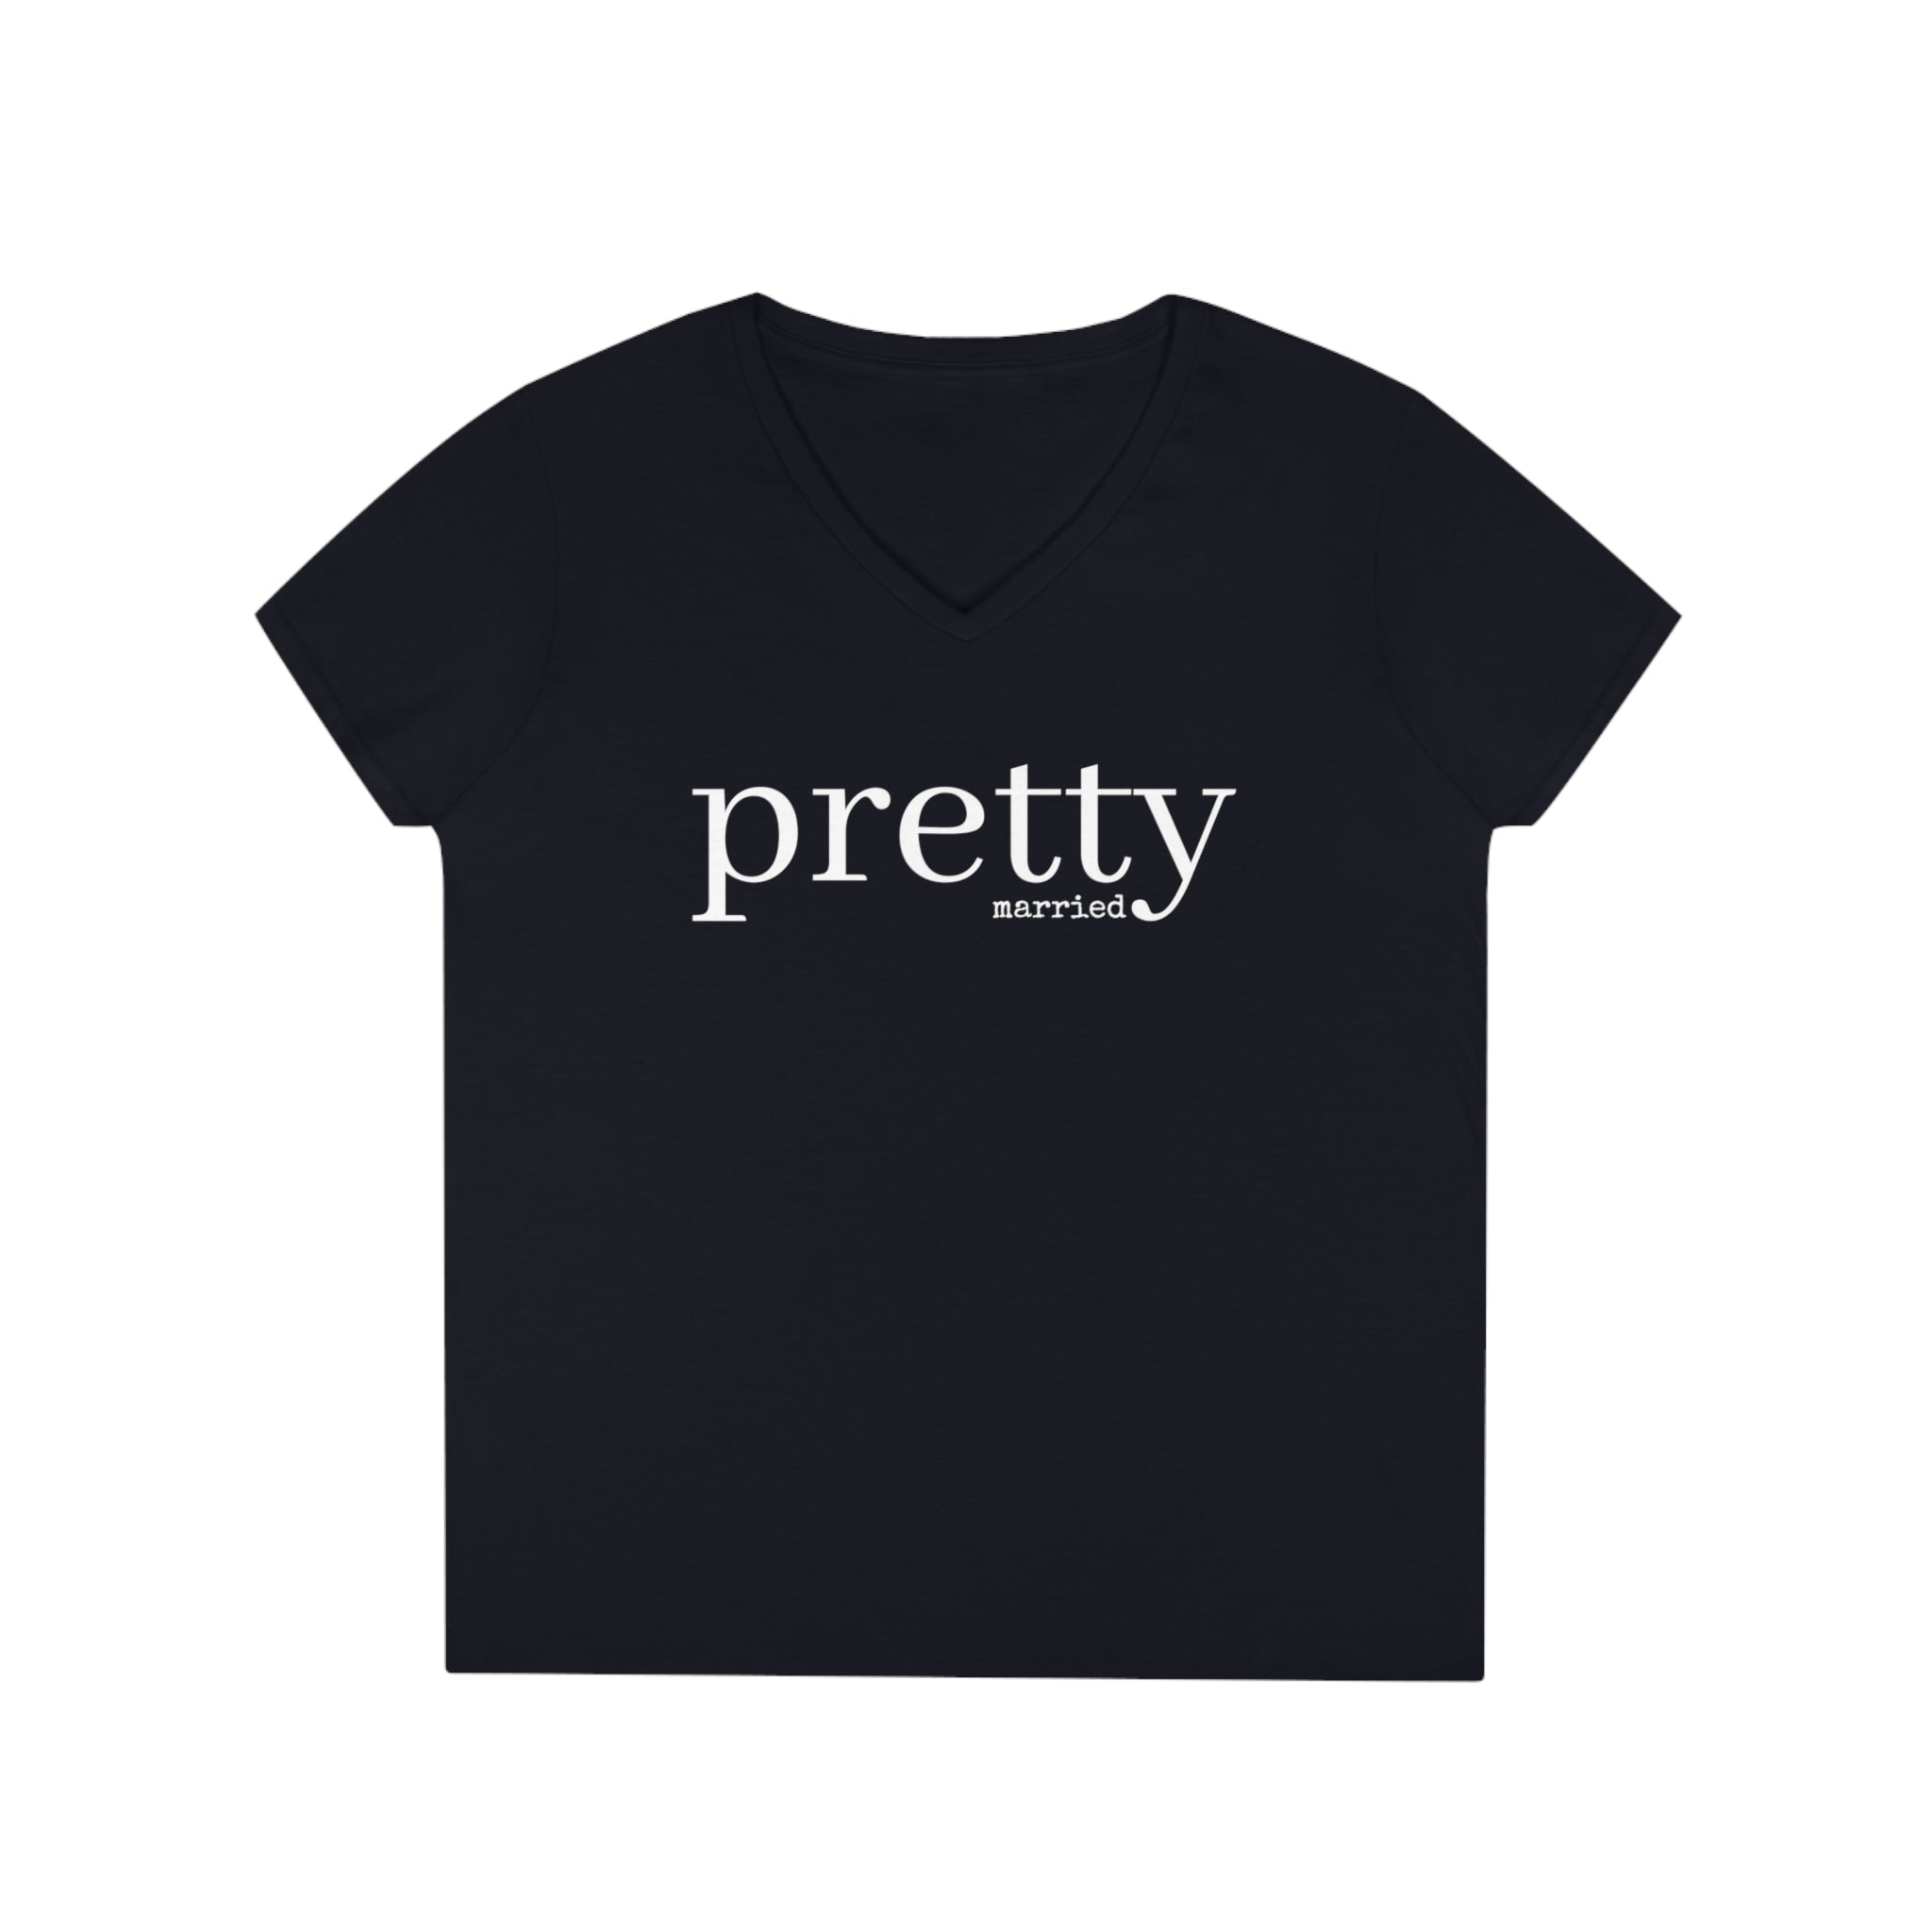 PRETTY married Women's V Neck T-shirt, Cute Graphic Tee